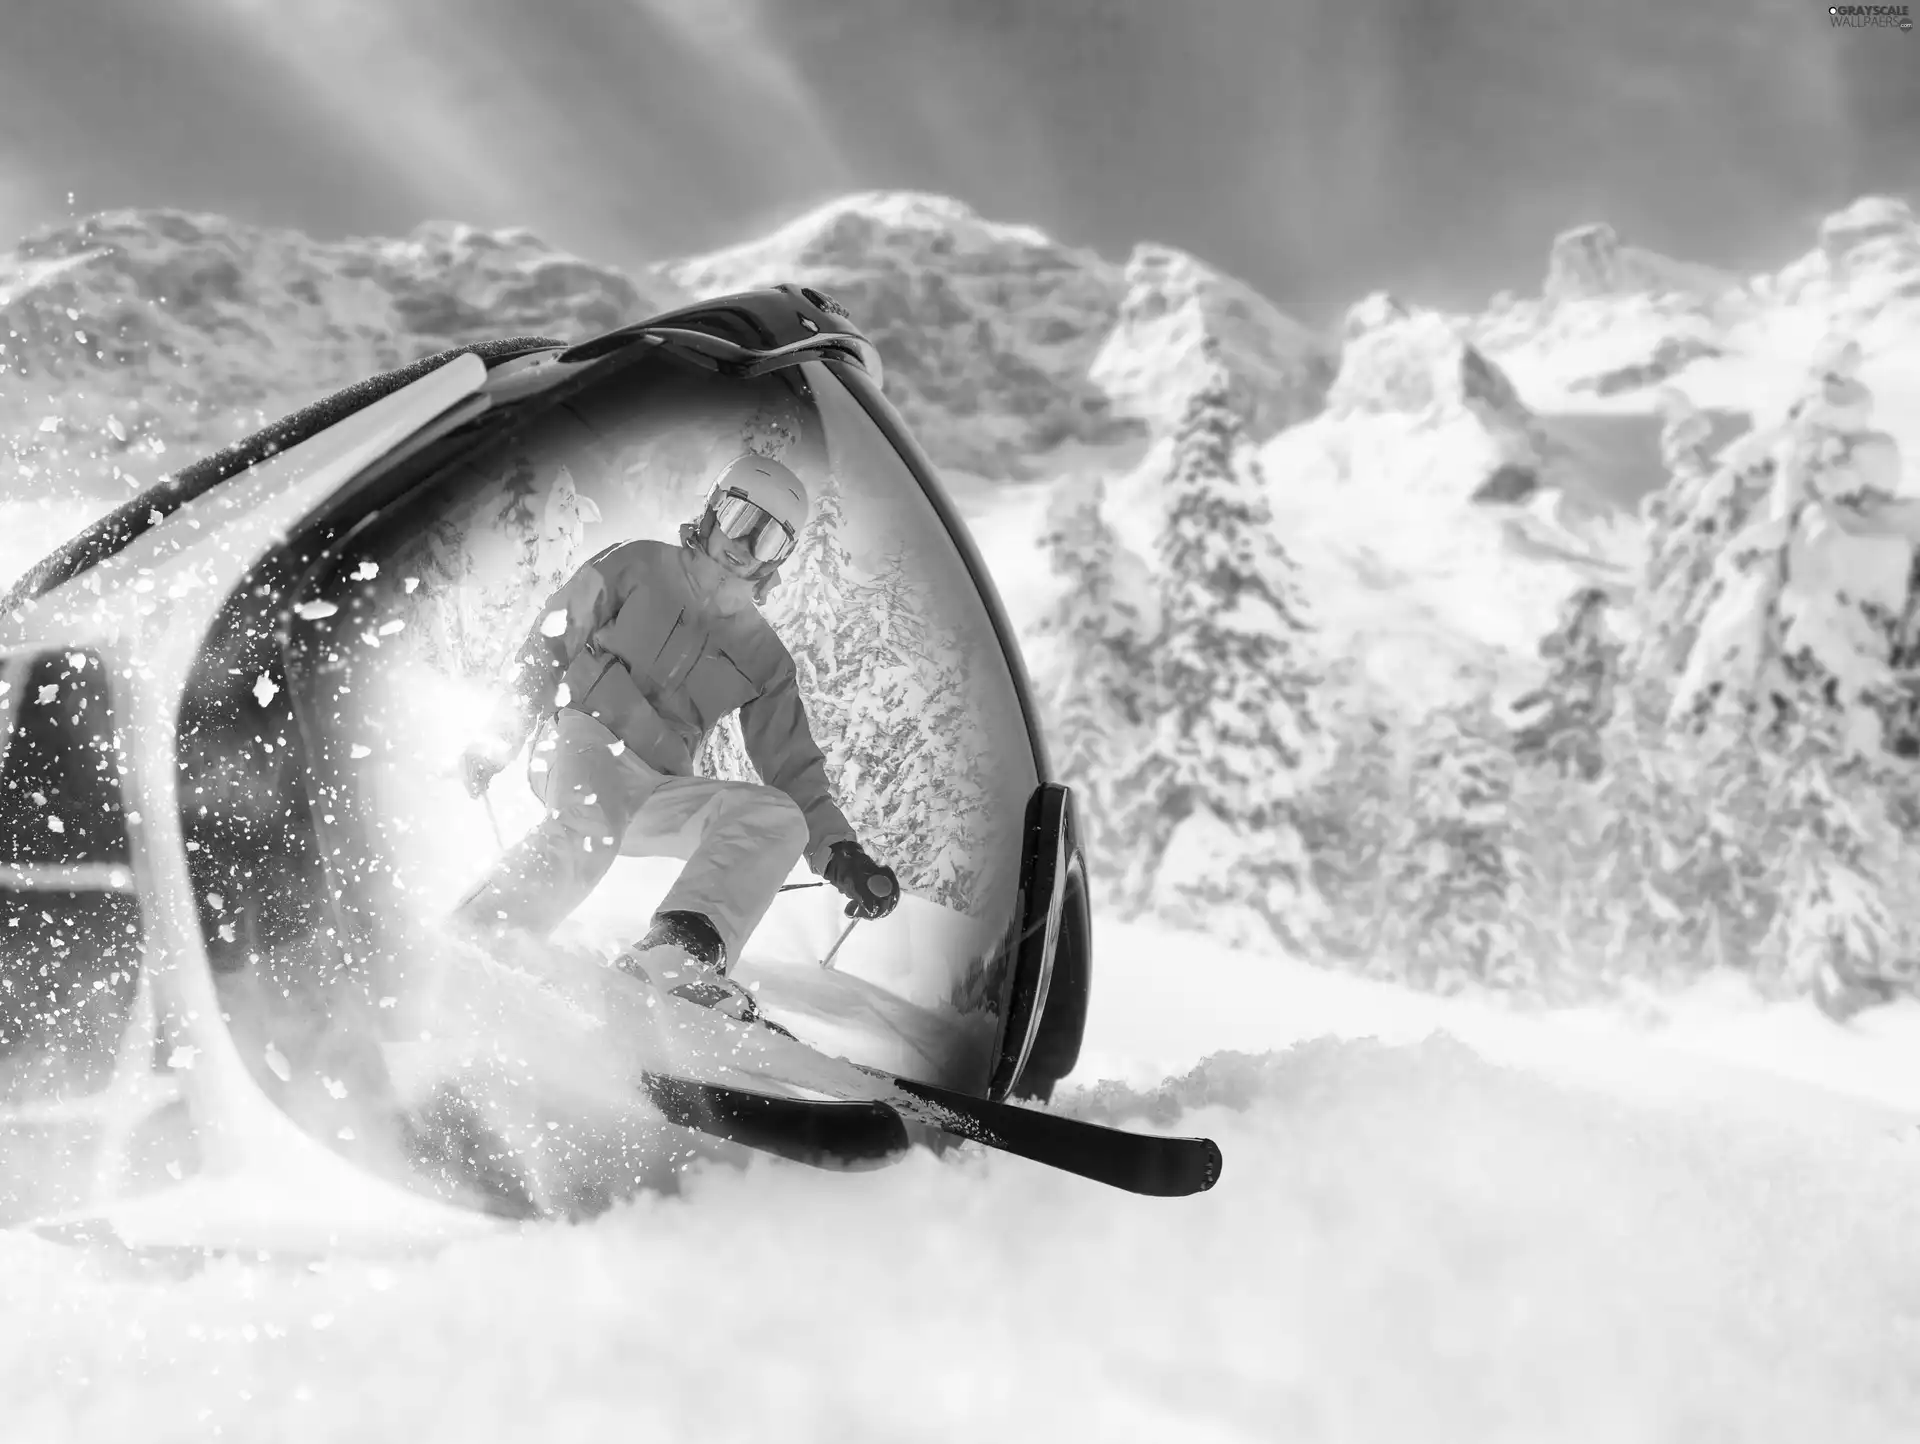 reflection, snow, trees, 4d, viewes, Mountains, winter, skiing, Skier, Glasses